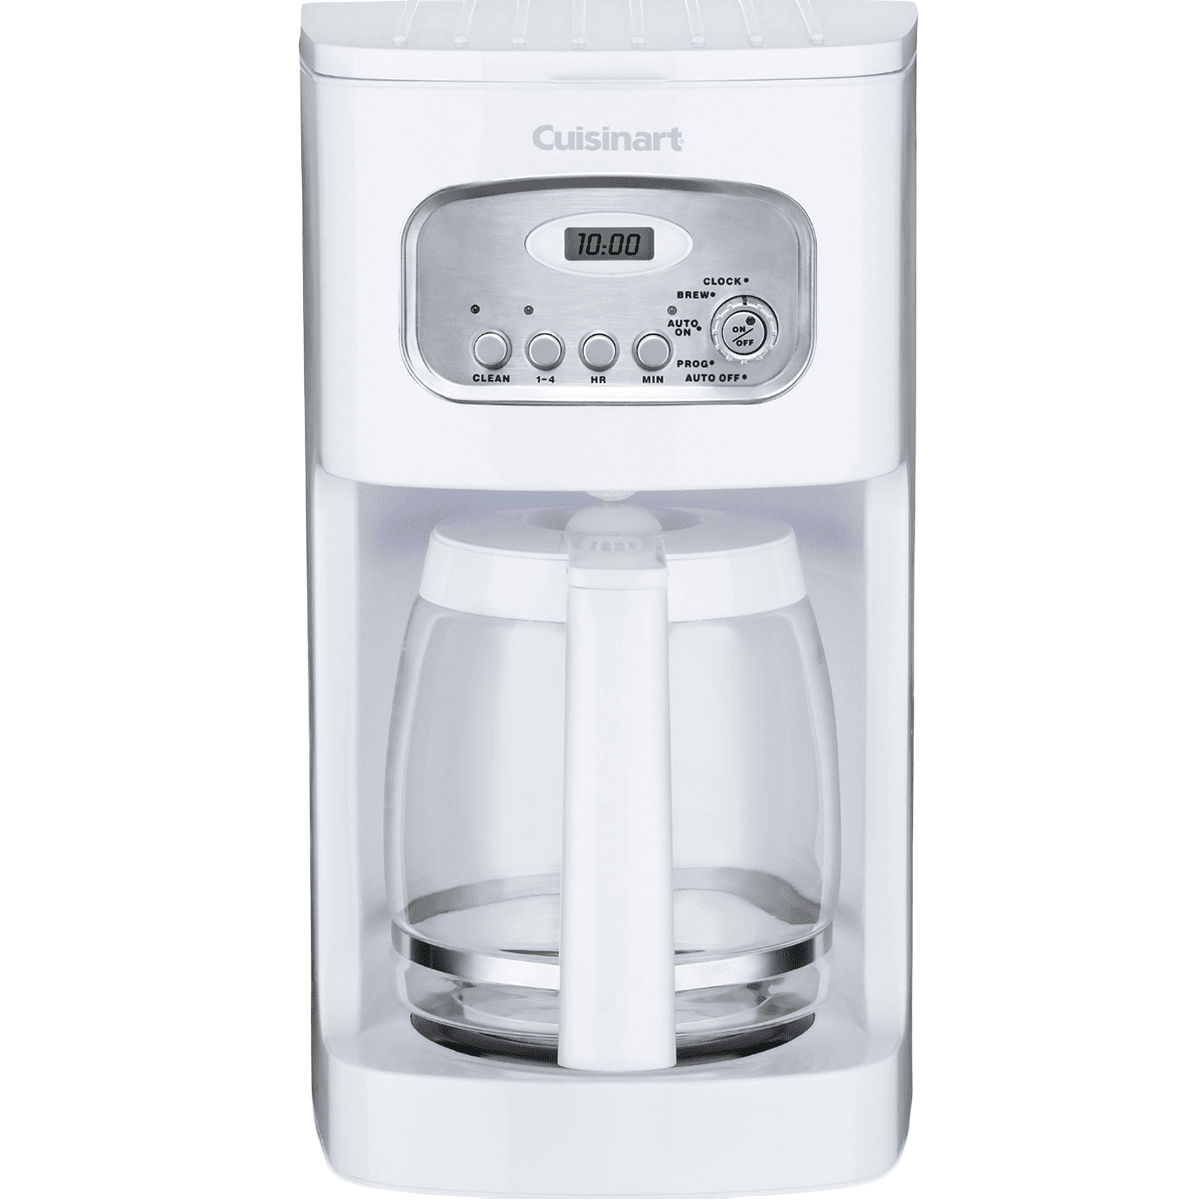 Cuisinart DCC-1100 12-Cup Programmable Coffee Maker - White